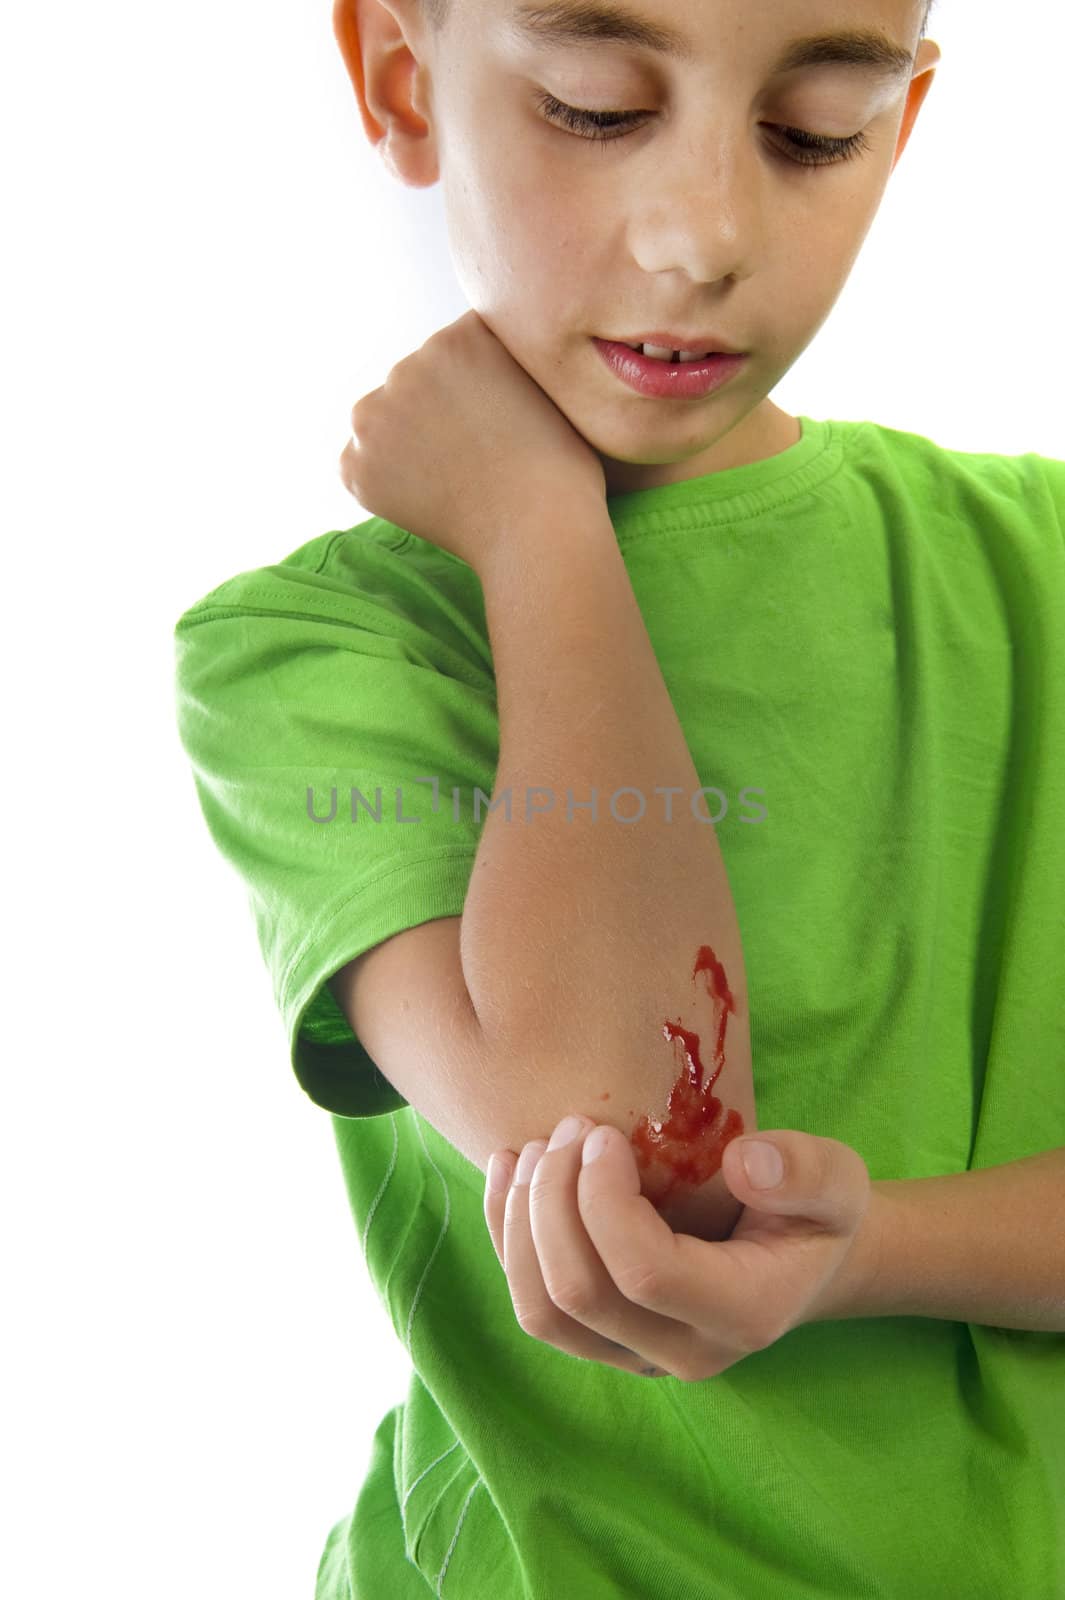 a young boy with a painful elbow on white